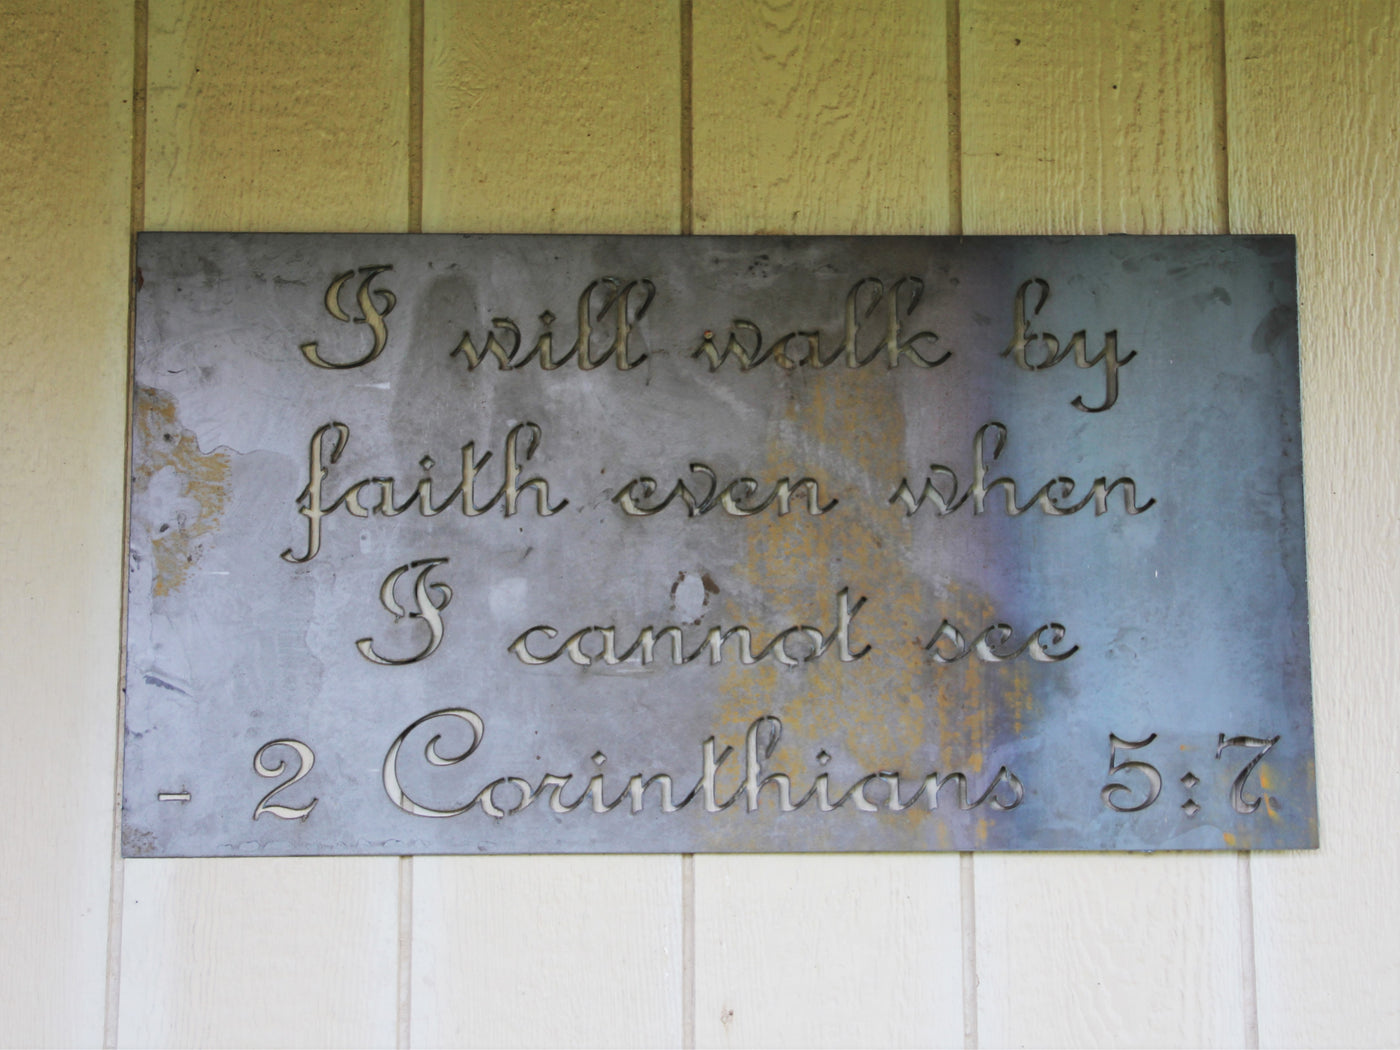 2 Corinthians 5:7 Metal Word Sign - Madison Iron and Wood - Wall Art - metal outdoor decor - Steel deocrations - american made products - veteran owned business products - fencing decorations - fencing supplies - custom wall decorations - personalized wall signs - steel - decorative post caps - steel post caps - metal post caps - brackets - structural brackets - home improvement - easter - easter decorations - easter gift - easter yard decor